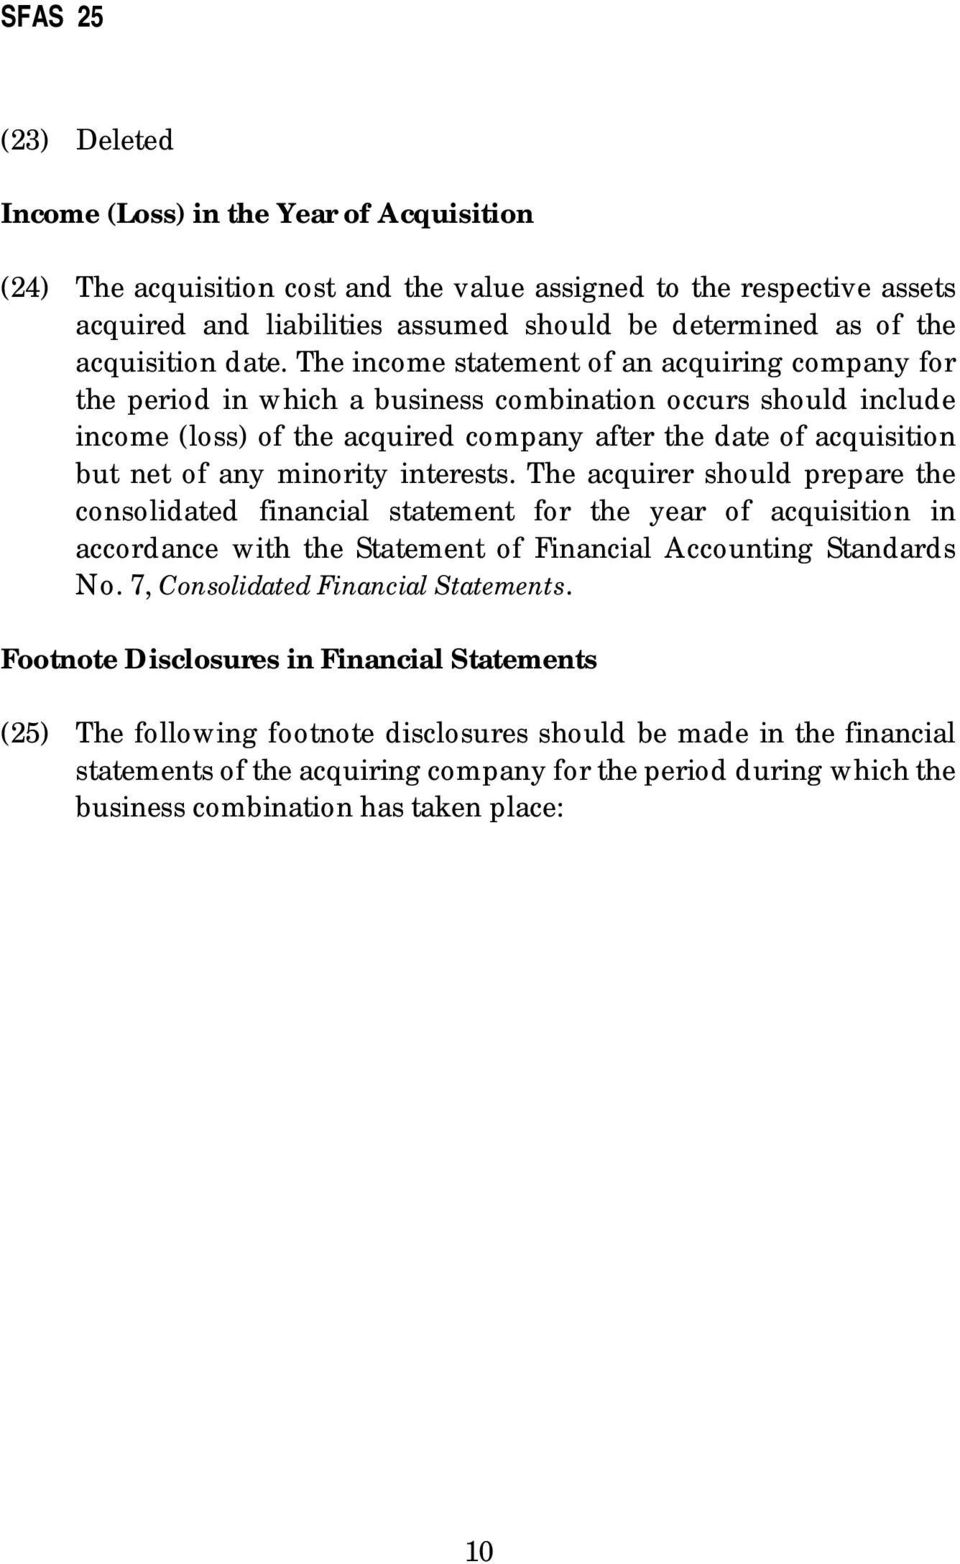 The income statement of an acquiring company for the period in which a business combination occurs should include income (loss) of the acquired company after the date of acquisition but net of any